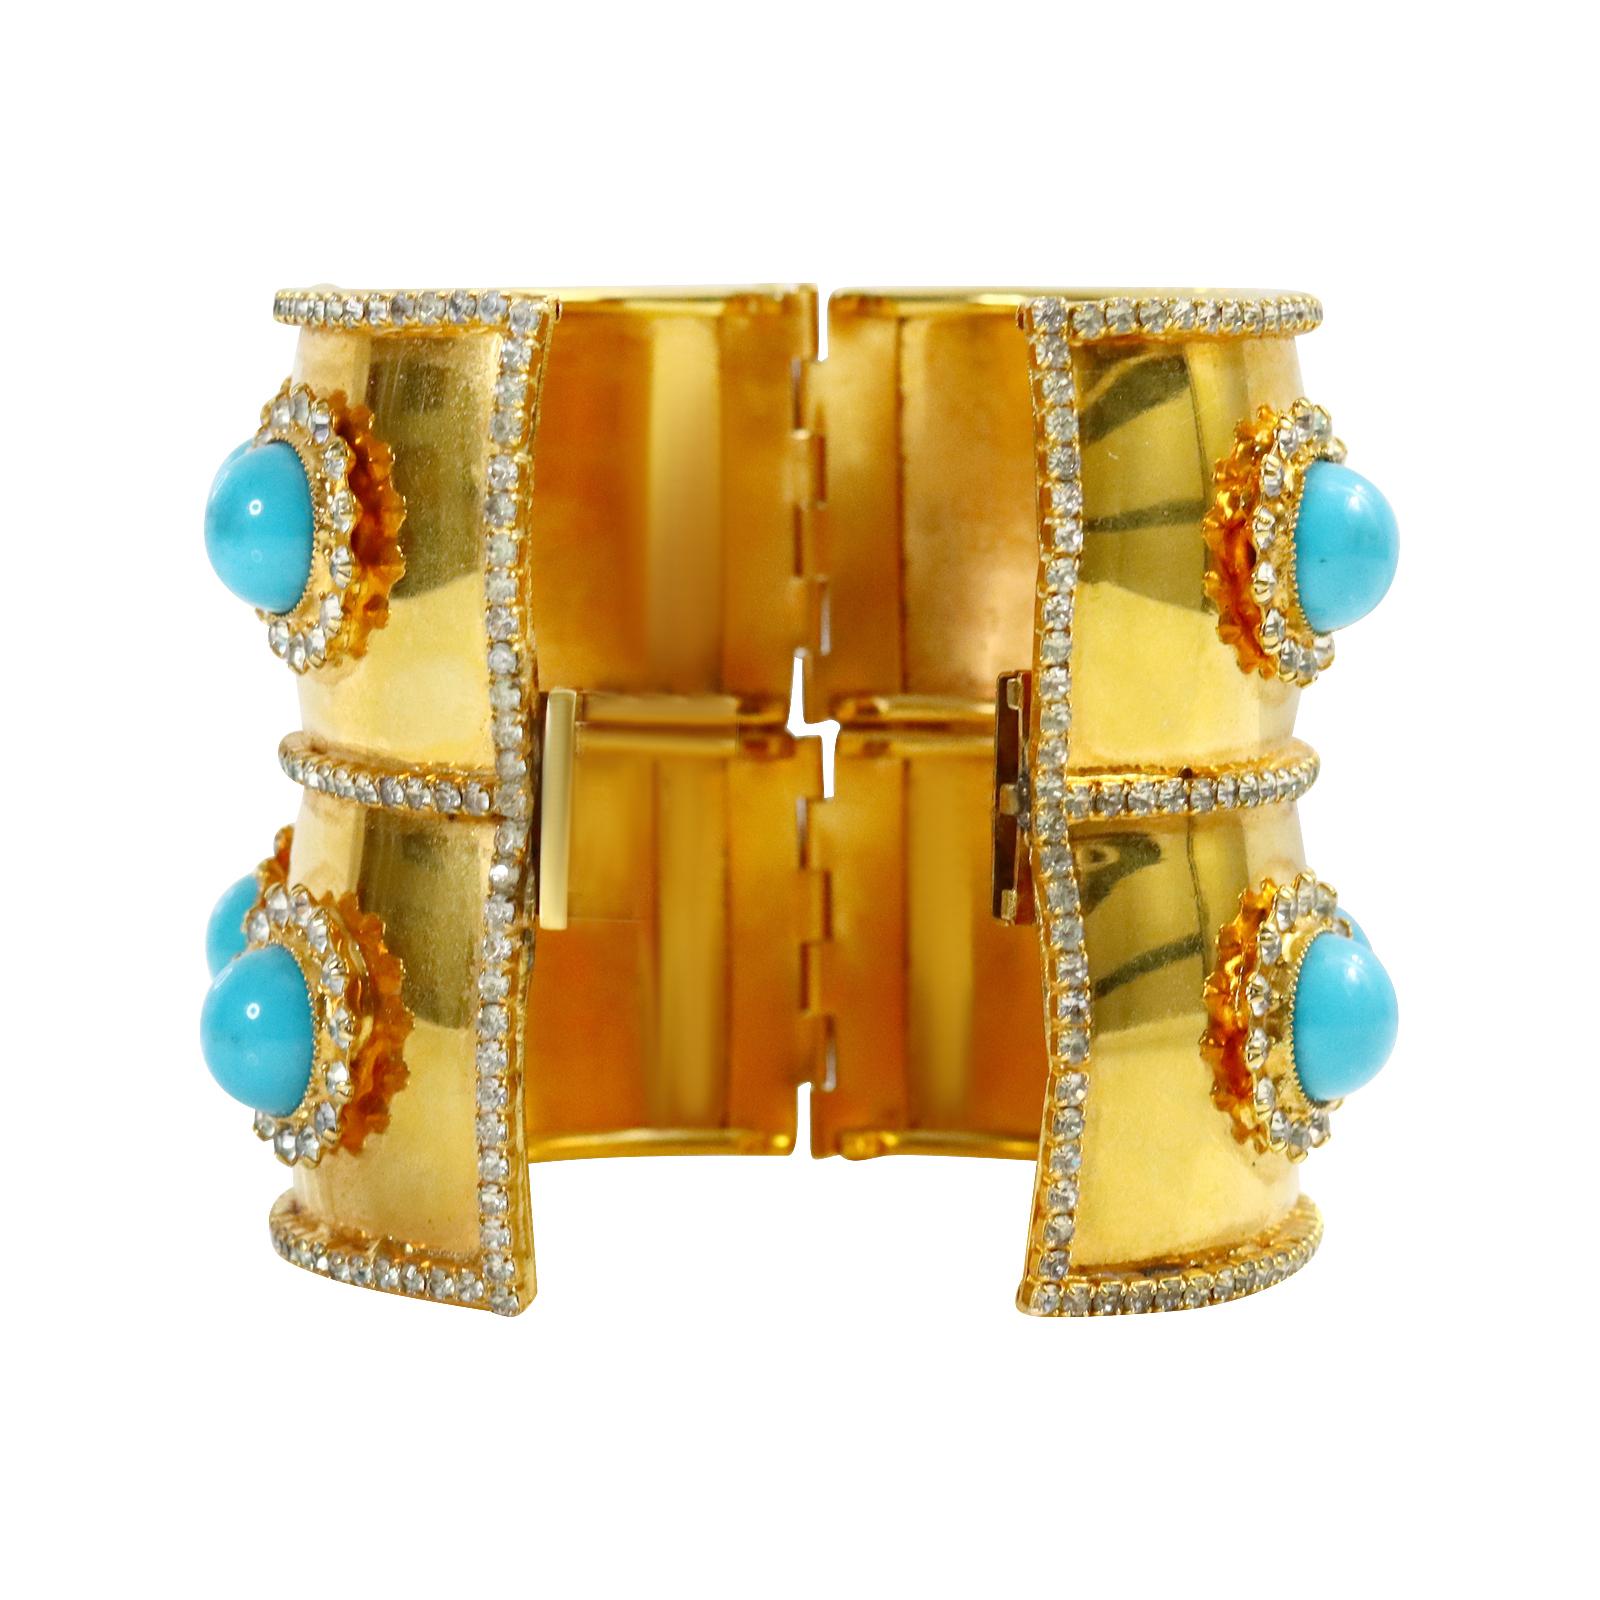 Vintage deLillo Gold Tone Crystal with Faux Turquoise Bracelet Circa !970s For Sale 10